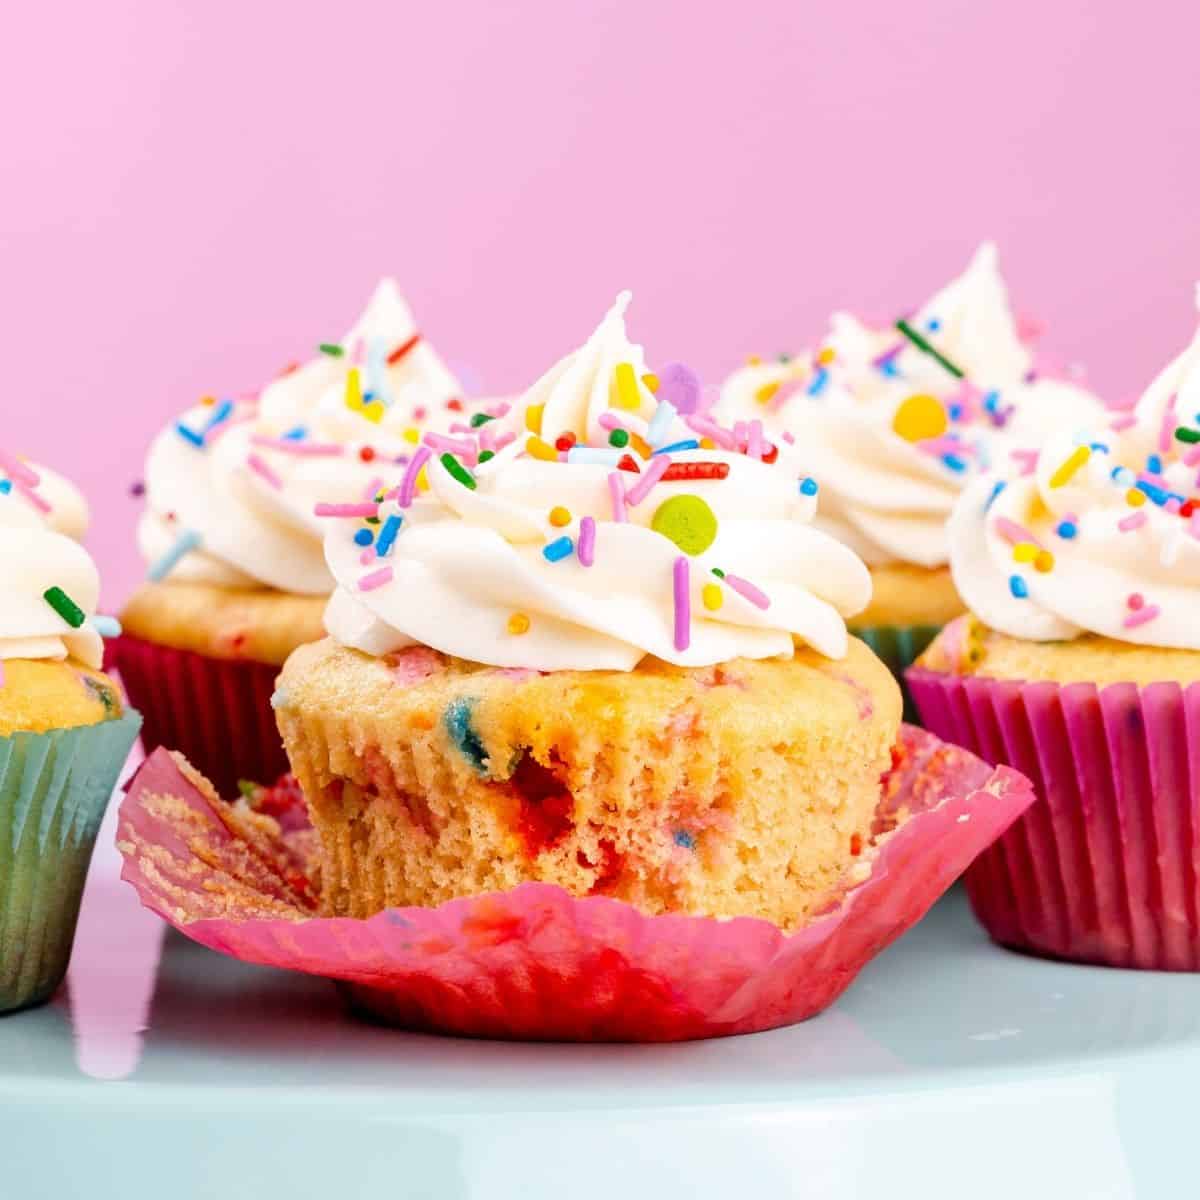 unwrapped gluten free birthday cupcakes on a stand in front of a pink background